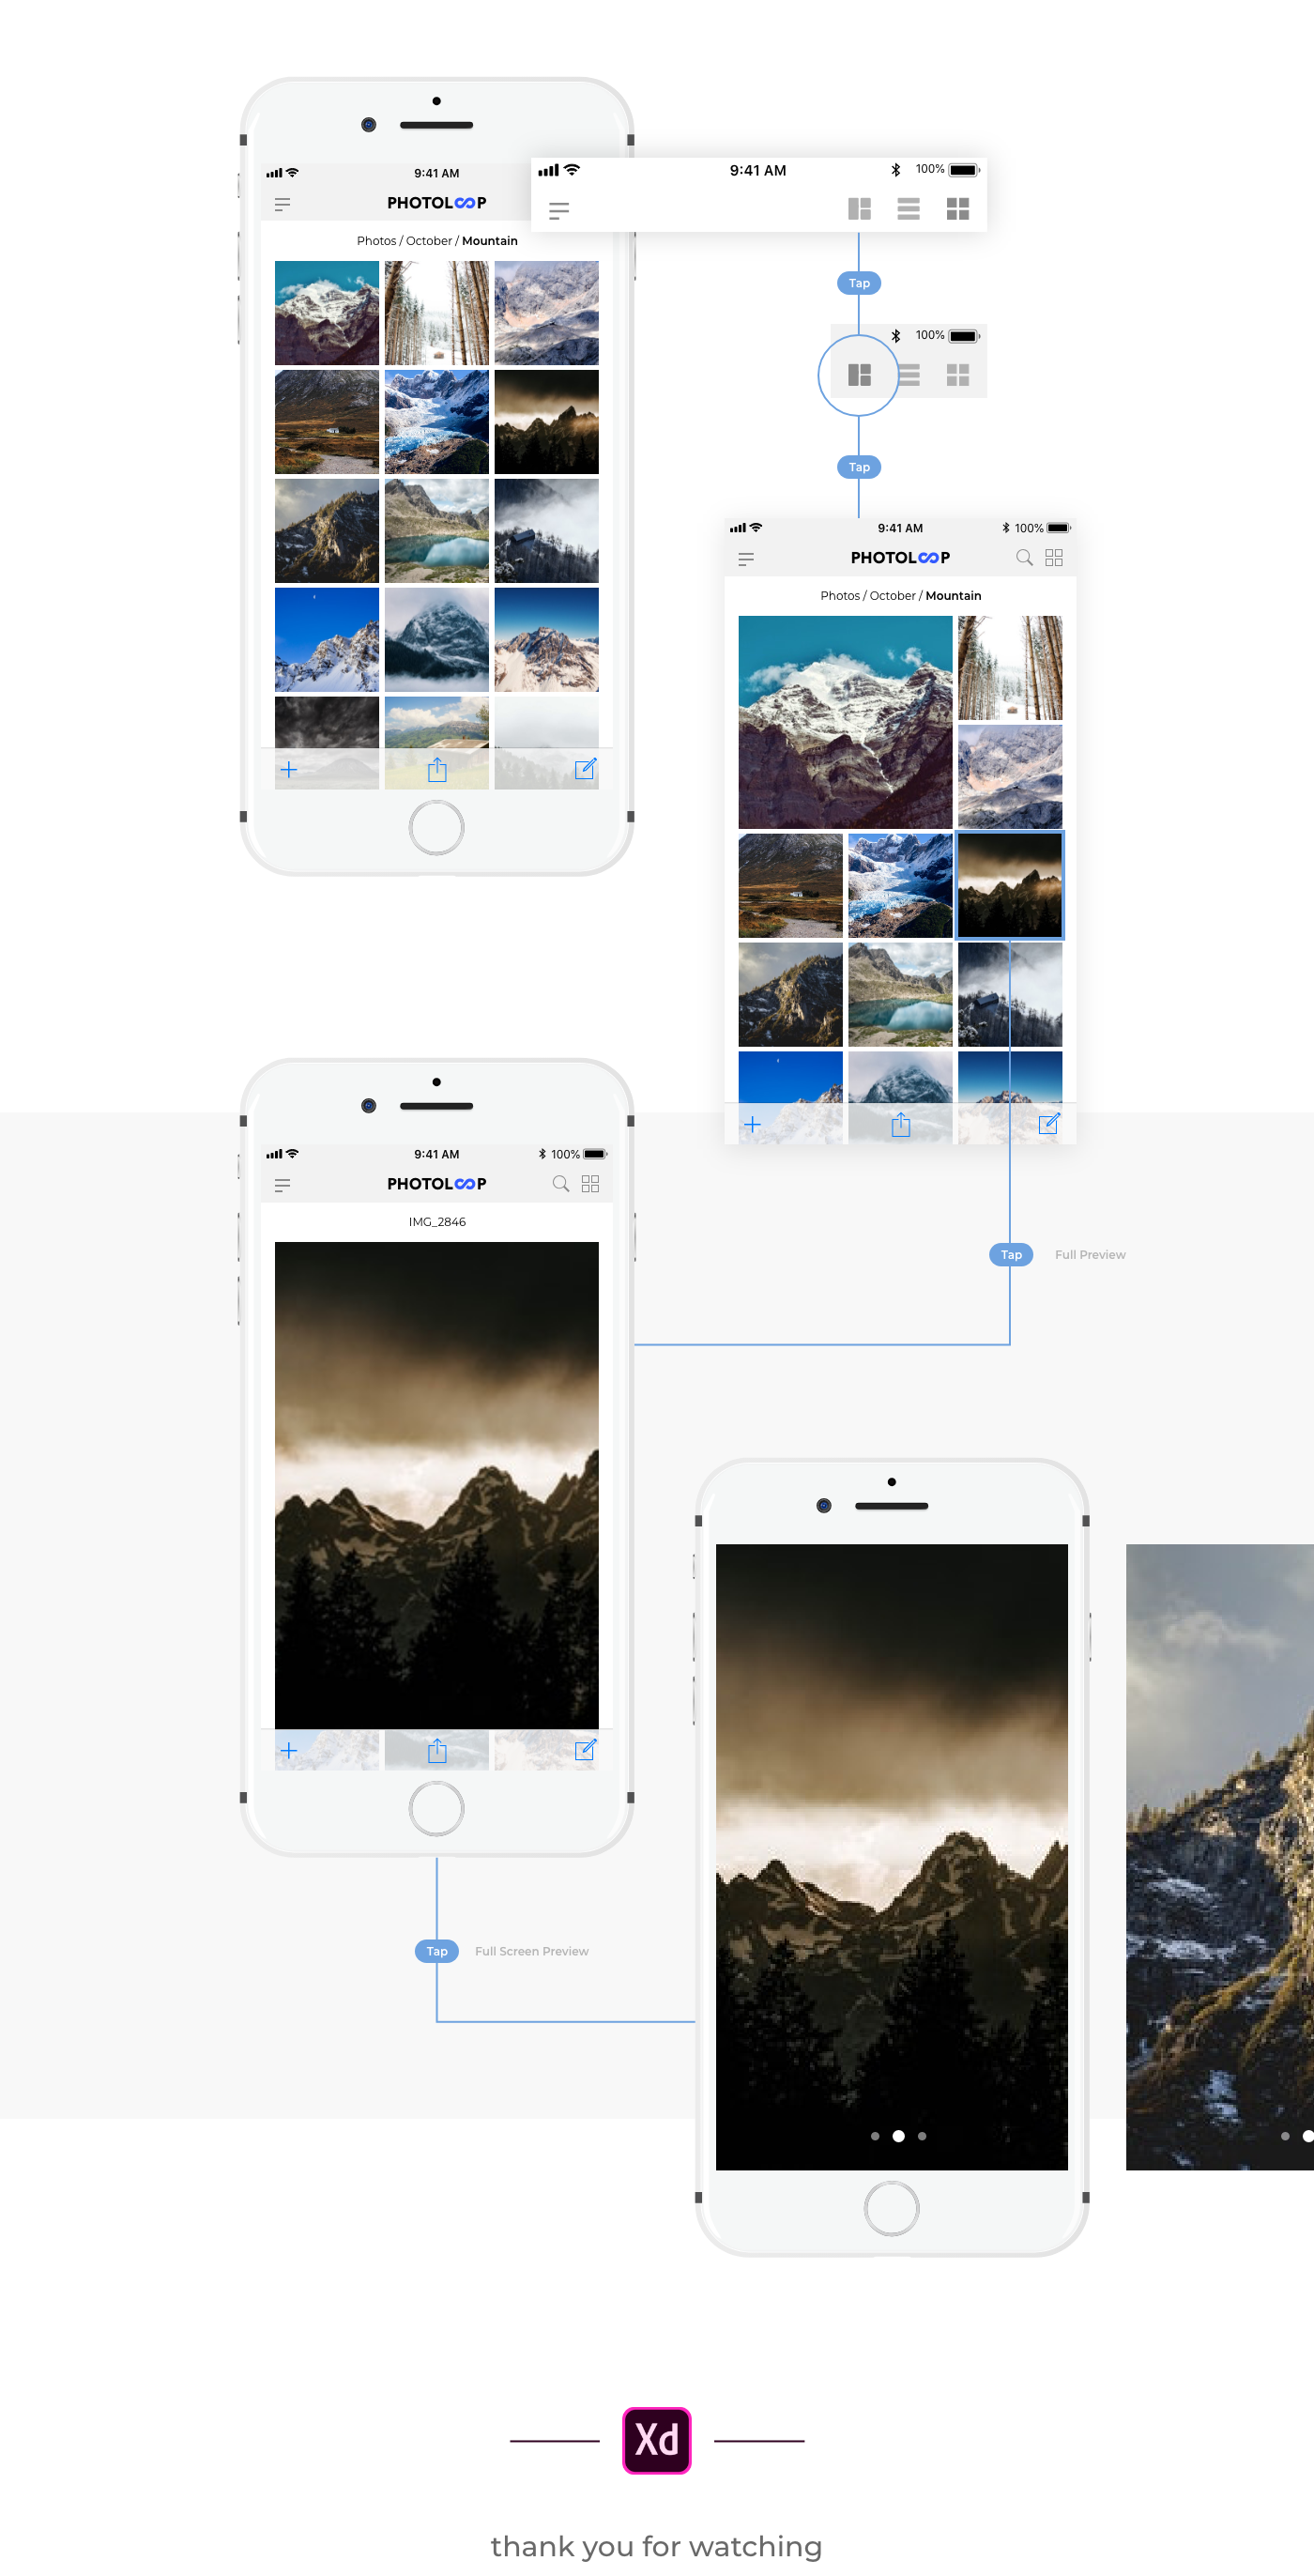 UI ux app photos browser gallery xD xddailychallenge